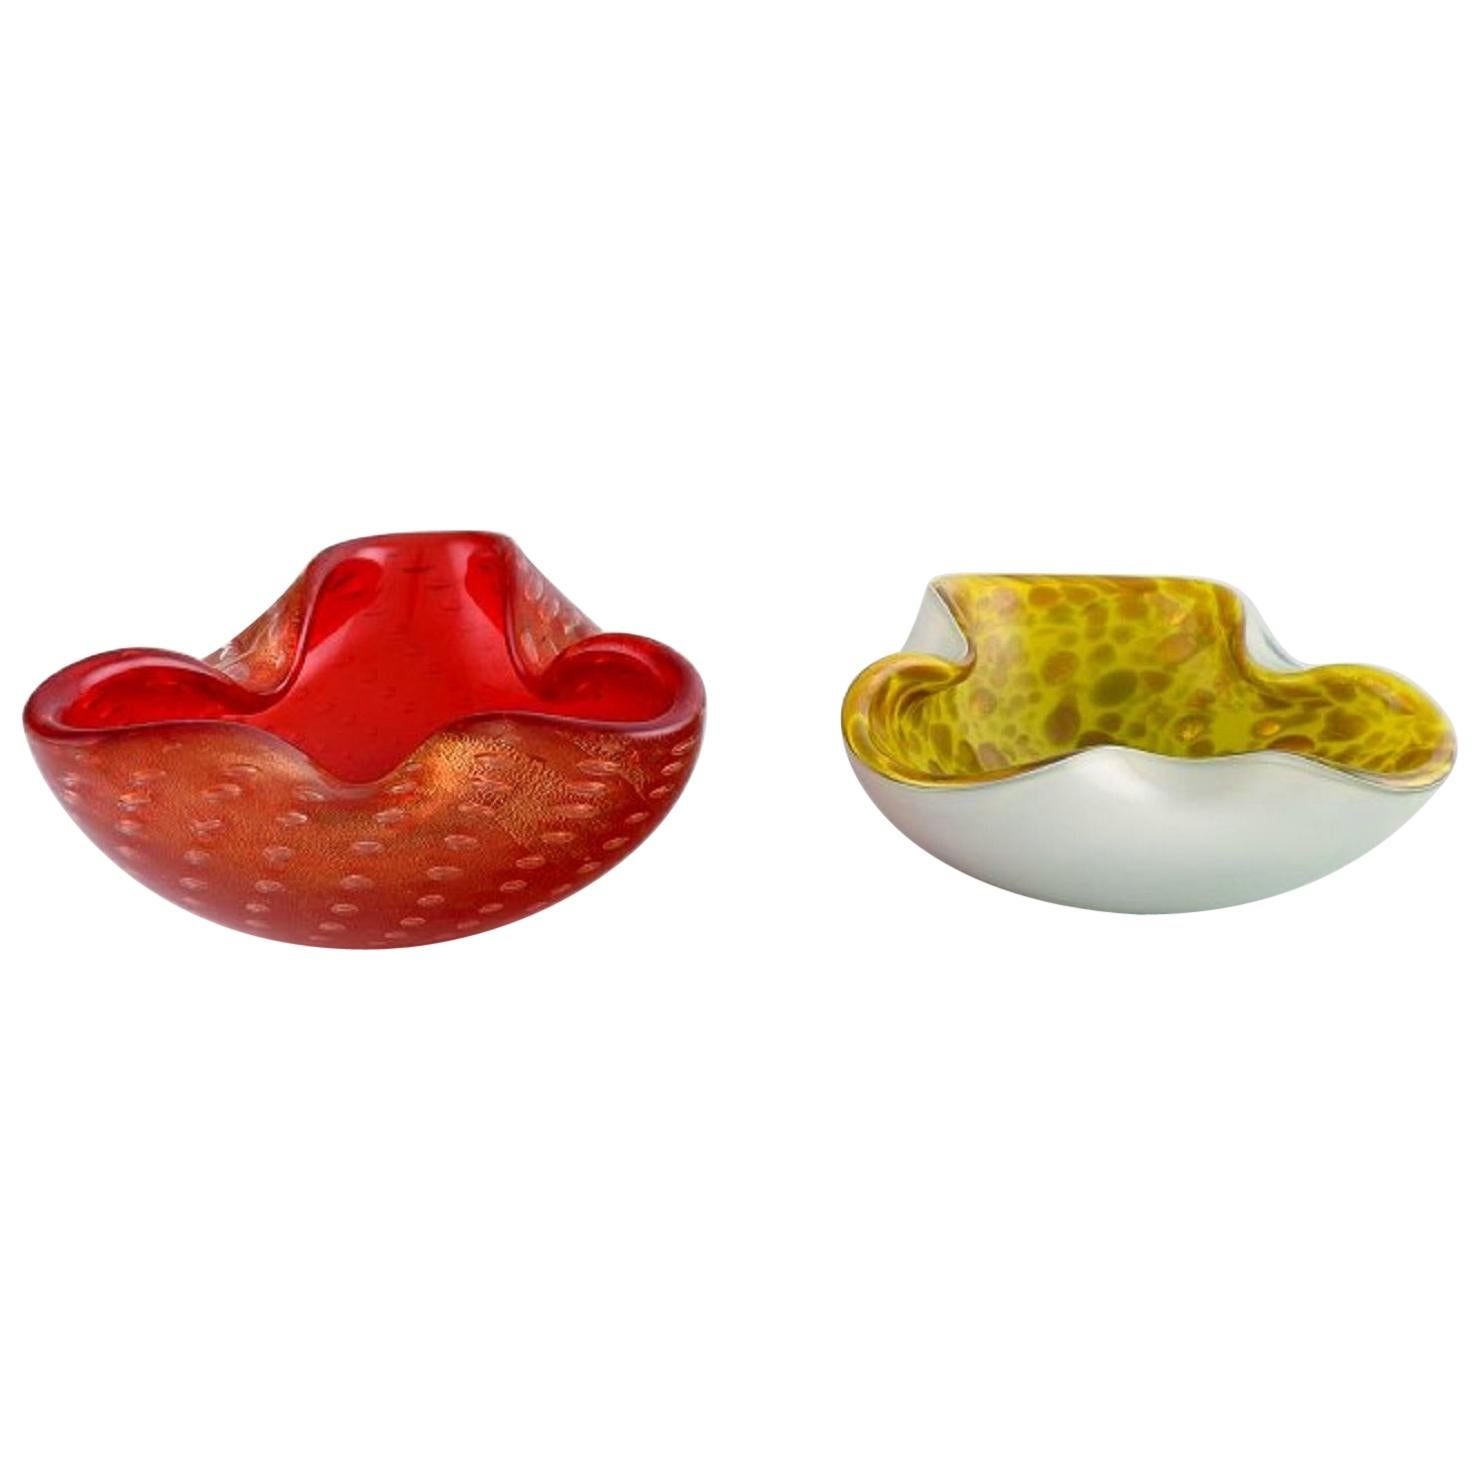 Two Murano Bowls in Mouth-Blown Art Glass with Inlaid Bubbles, Italian Design